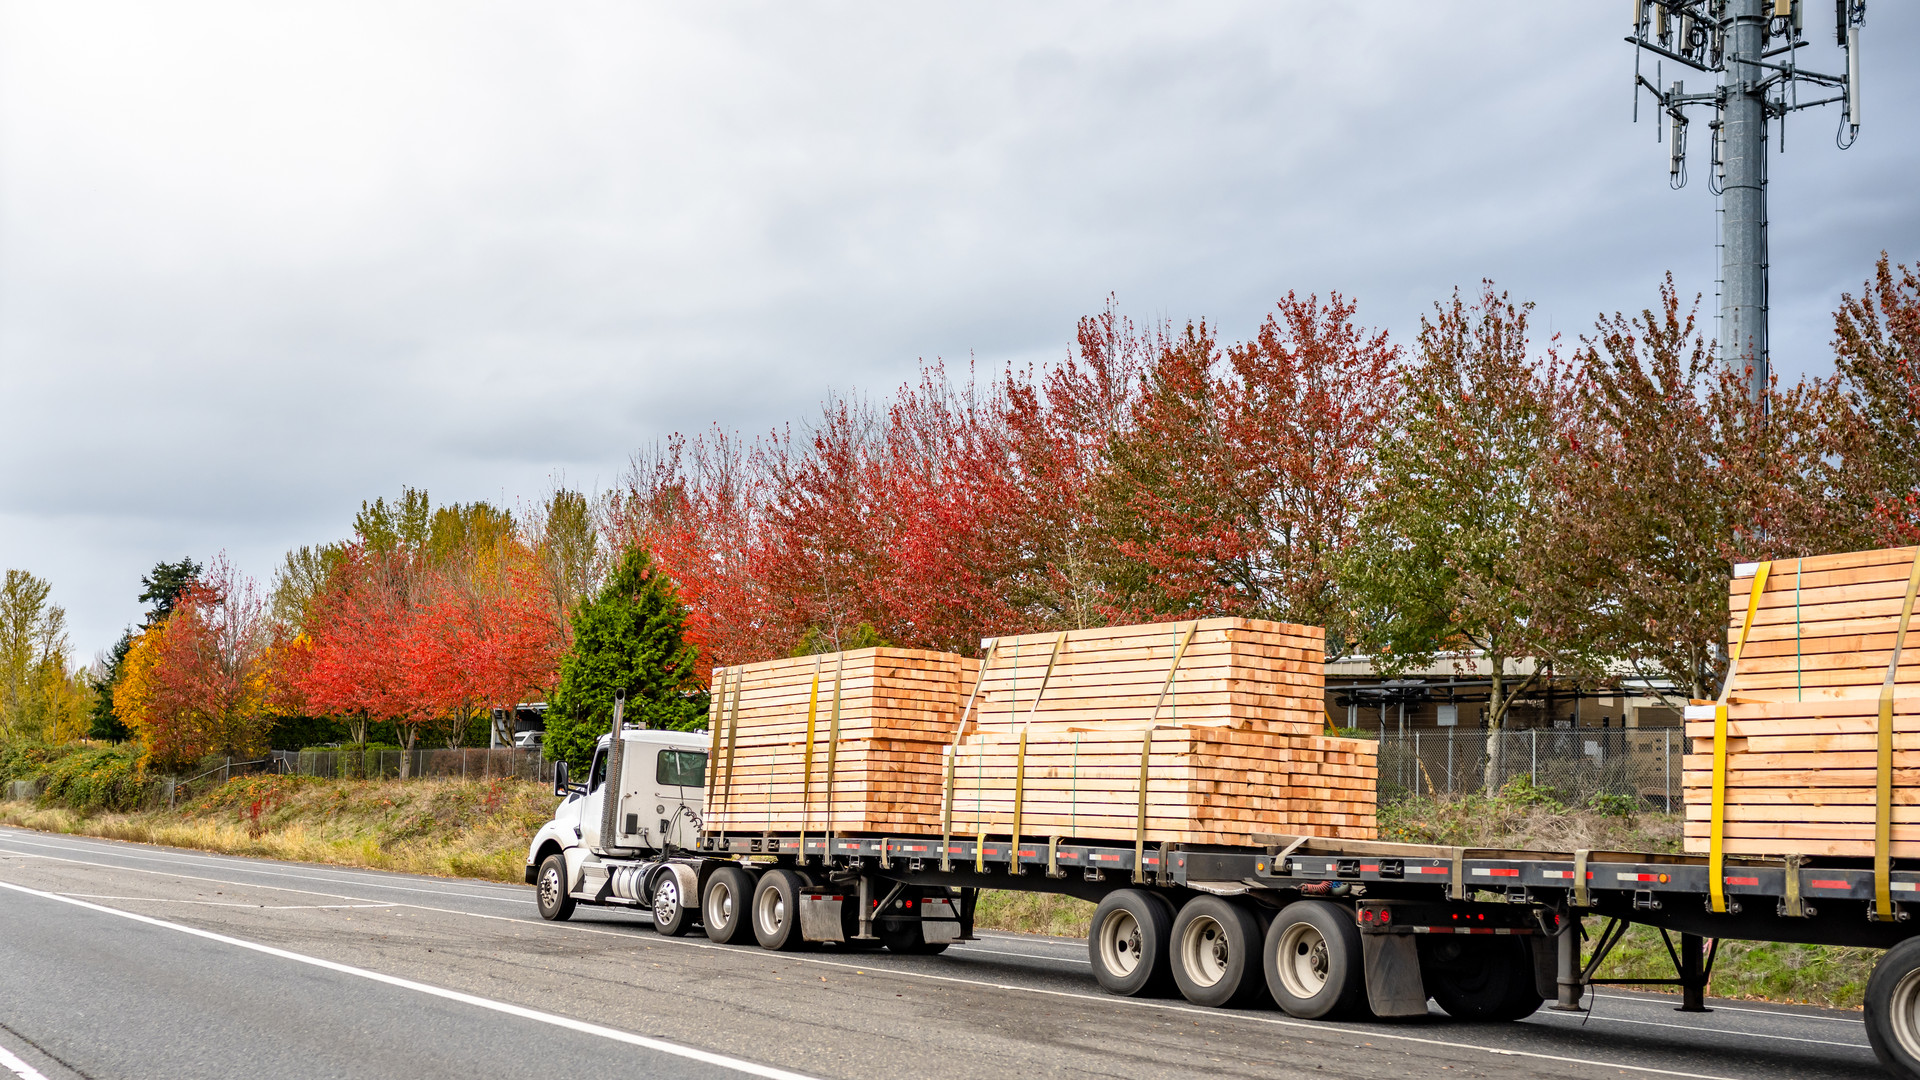 Powerful white big rig semi truck with day cab transporting lumber wood on two flat bed semi trailers running on the straight road with autumn trees